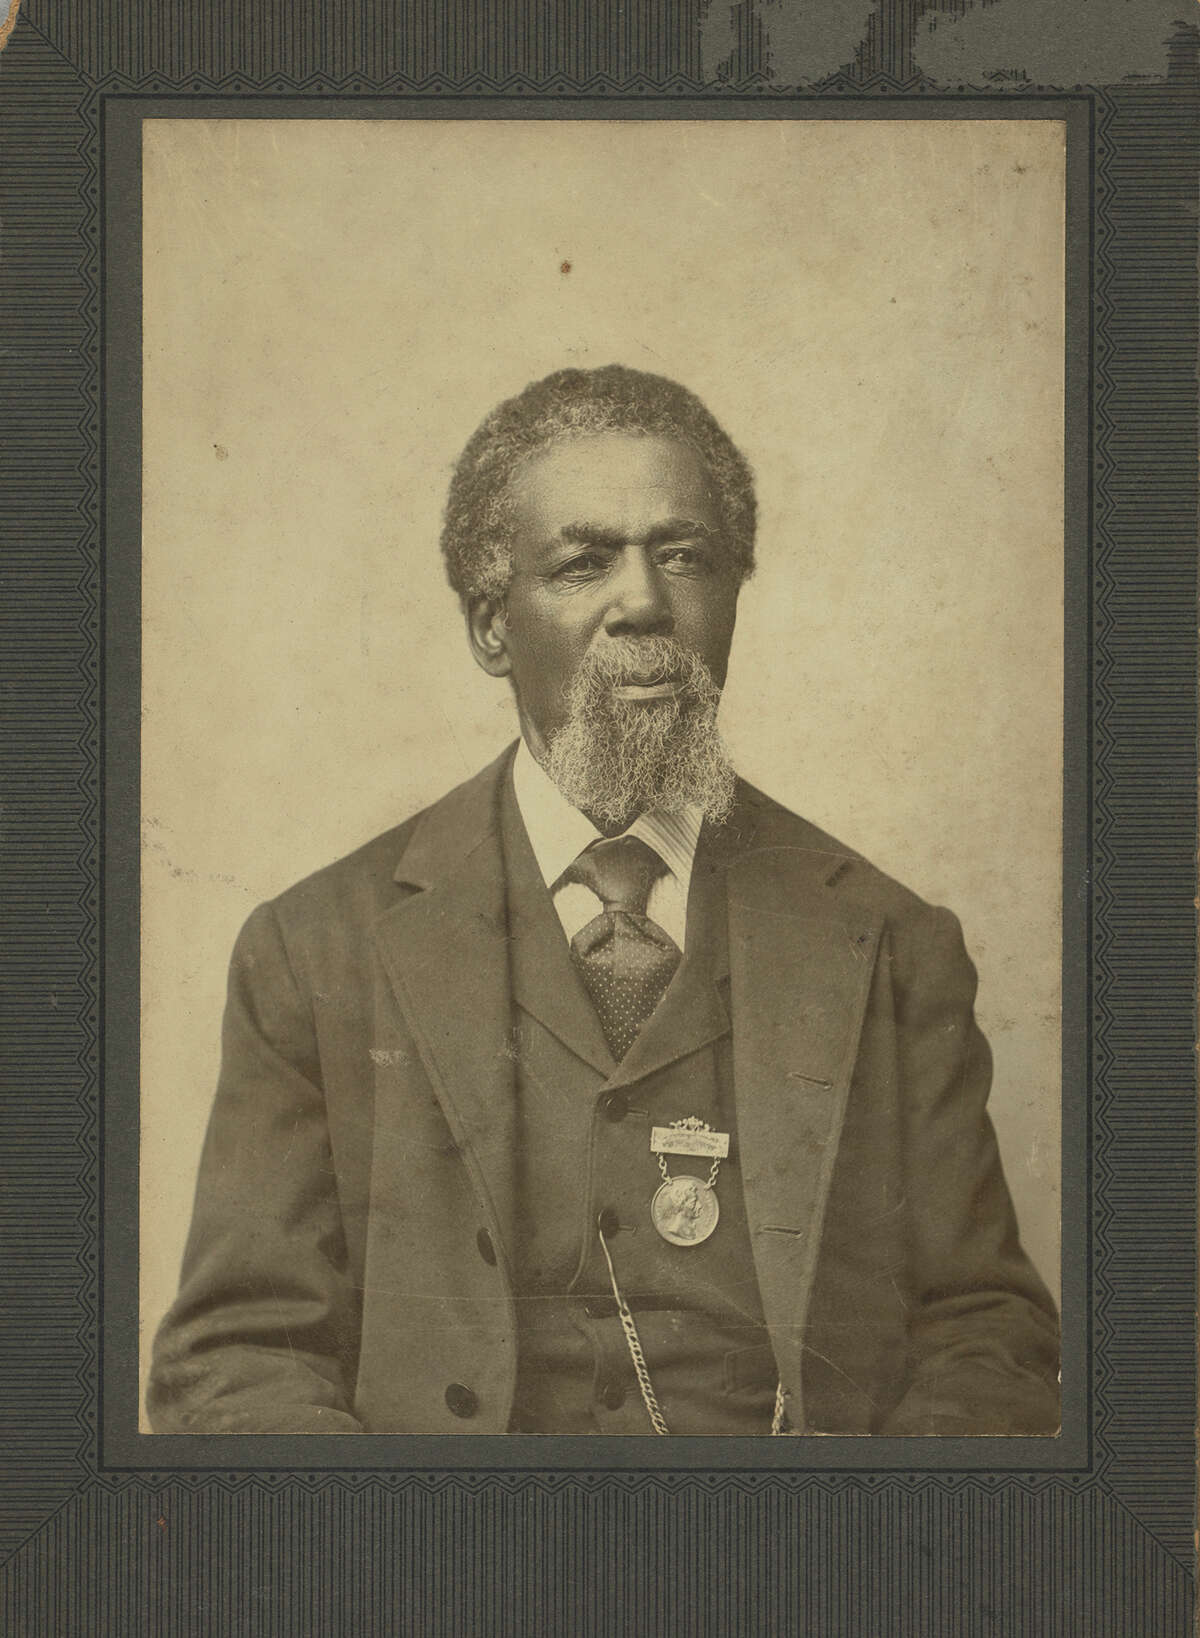 Thomas Mundy Peterson of Perth Amboy, New Jersey, is believed to have been the first African American to cast a ballot in a U.S. election under the provisions of the 15th Amendment. The citizens of Perth Amboy were voting to settle a disagreement over whether to revise the town charter or abandon it in favor of a township form of government.